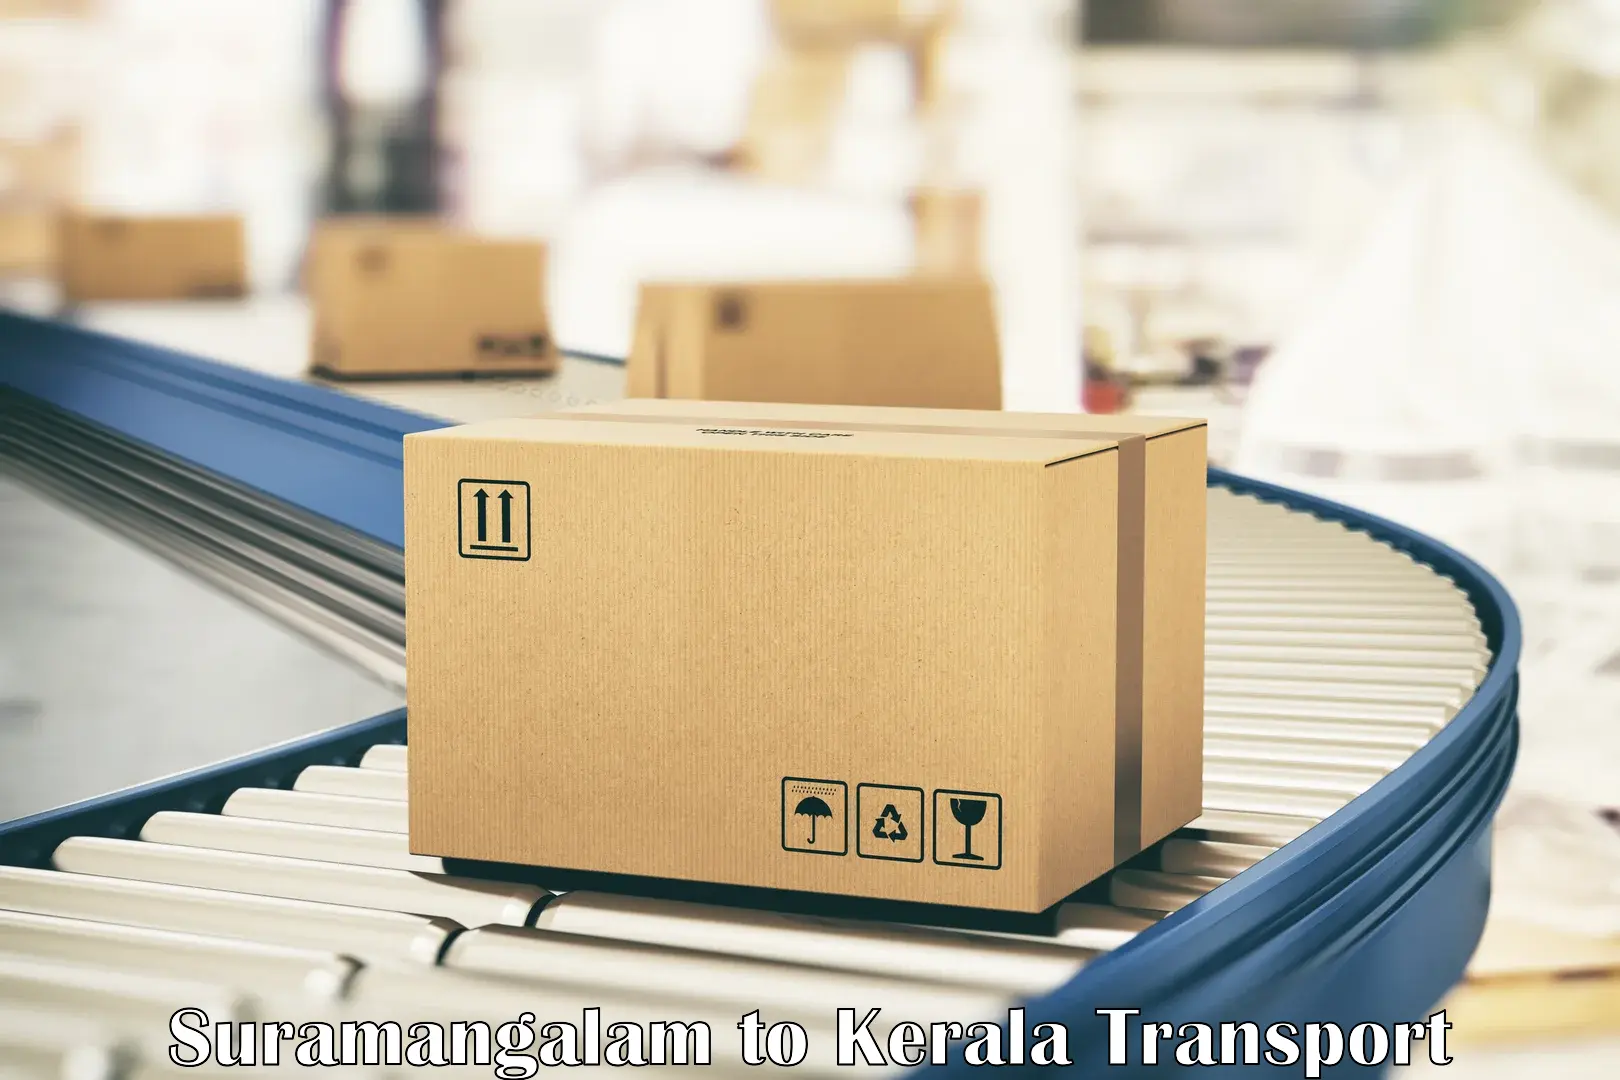 Container transportation services Suramangalam to Punalur